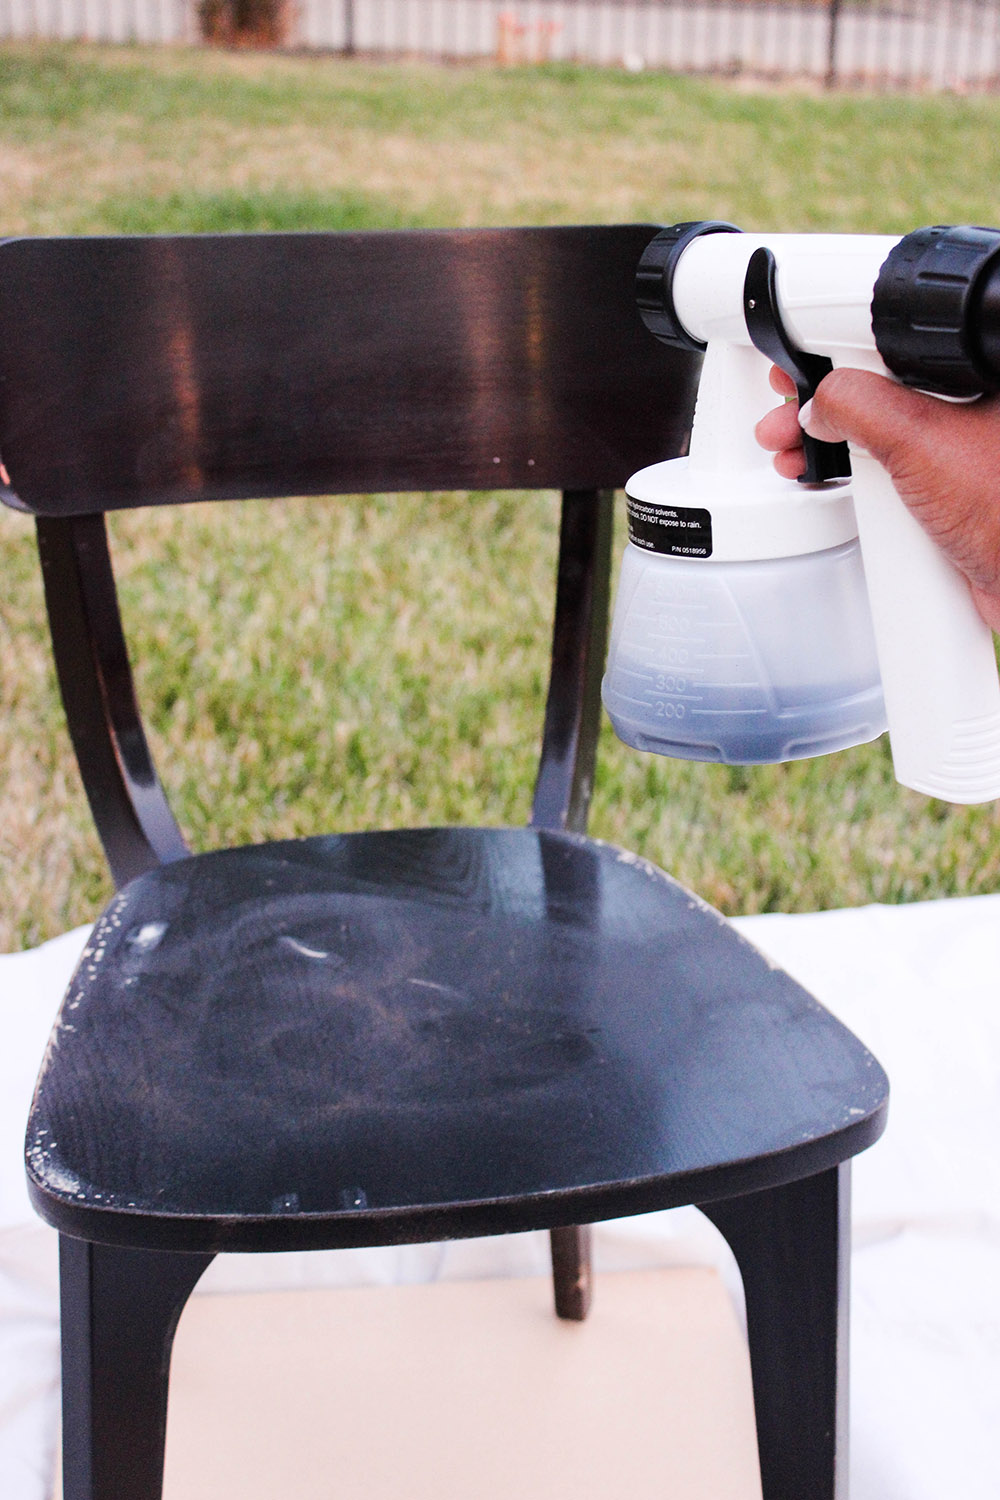 Repainting Furniture Using a Paint Sprayer - The Home Depot